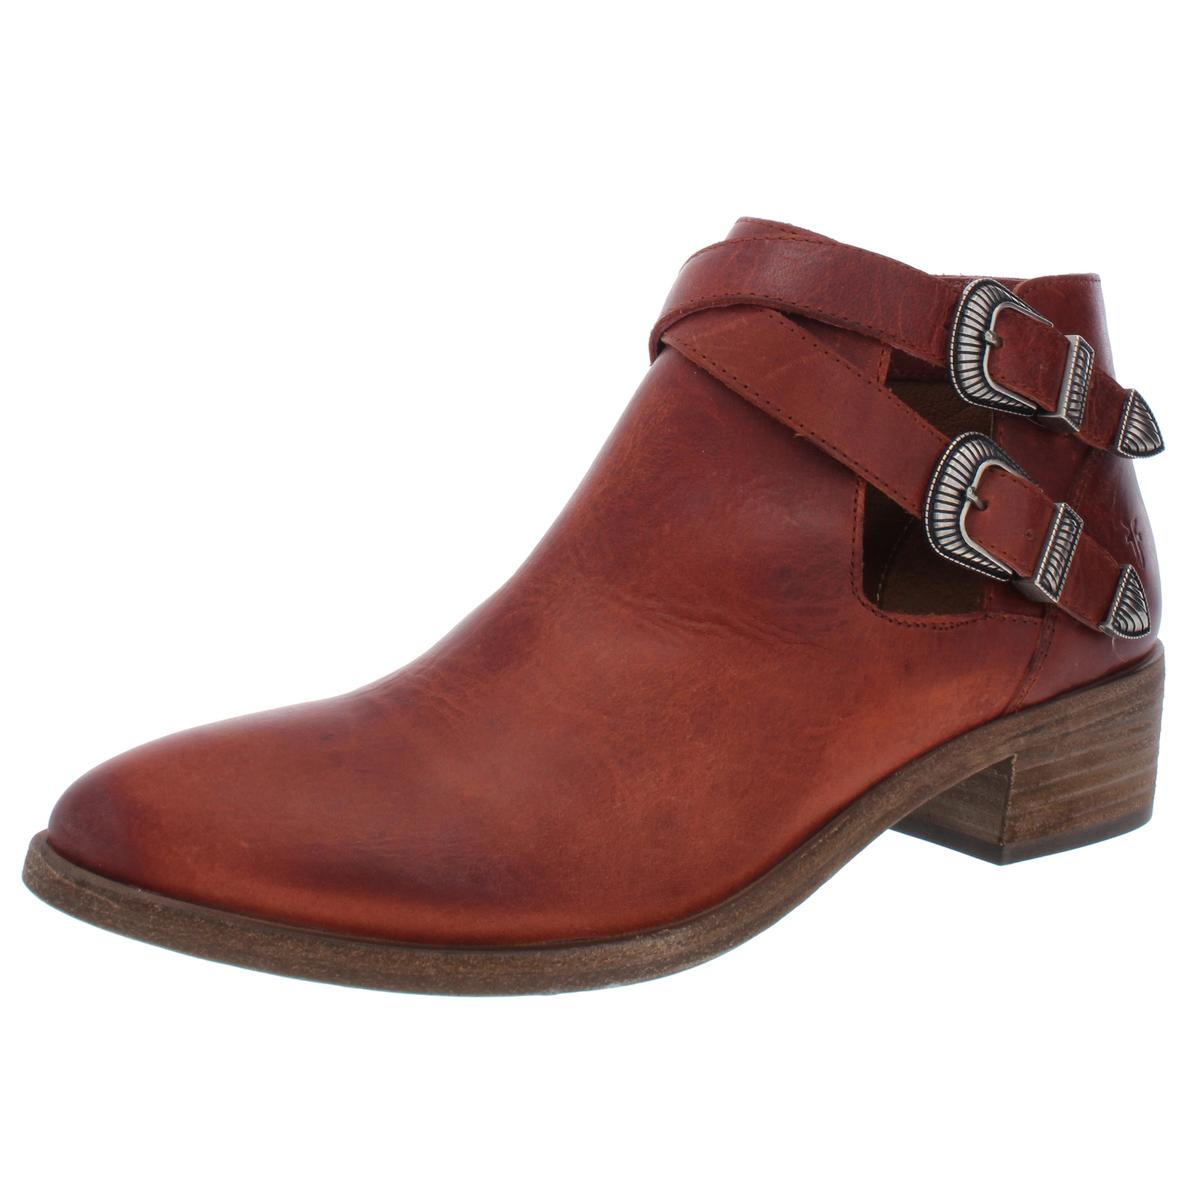 Frye Womens Ray Red Leather Buckle Shooties Boots 8 Medium (B,M) BHFO ...